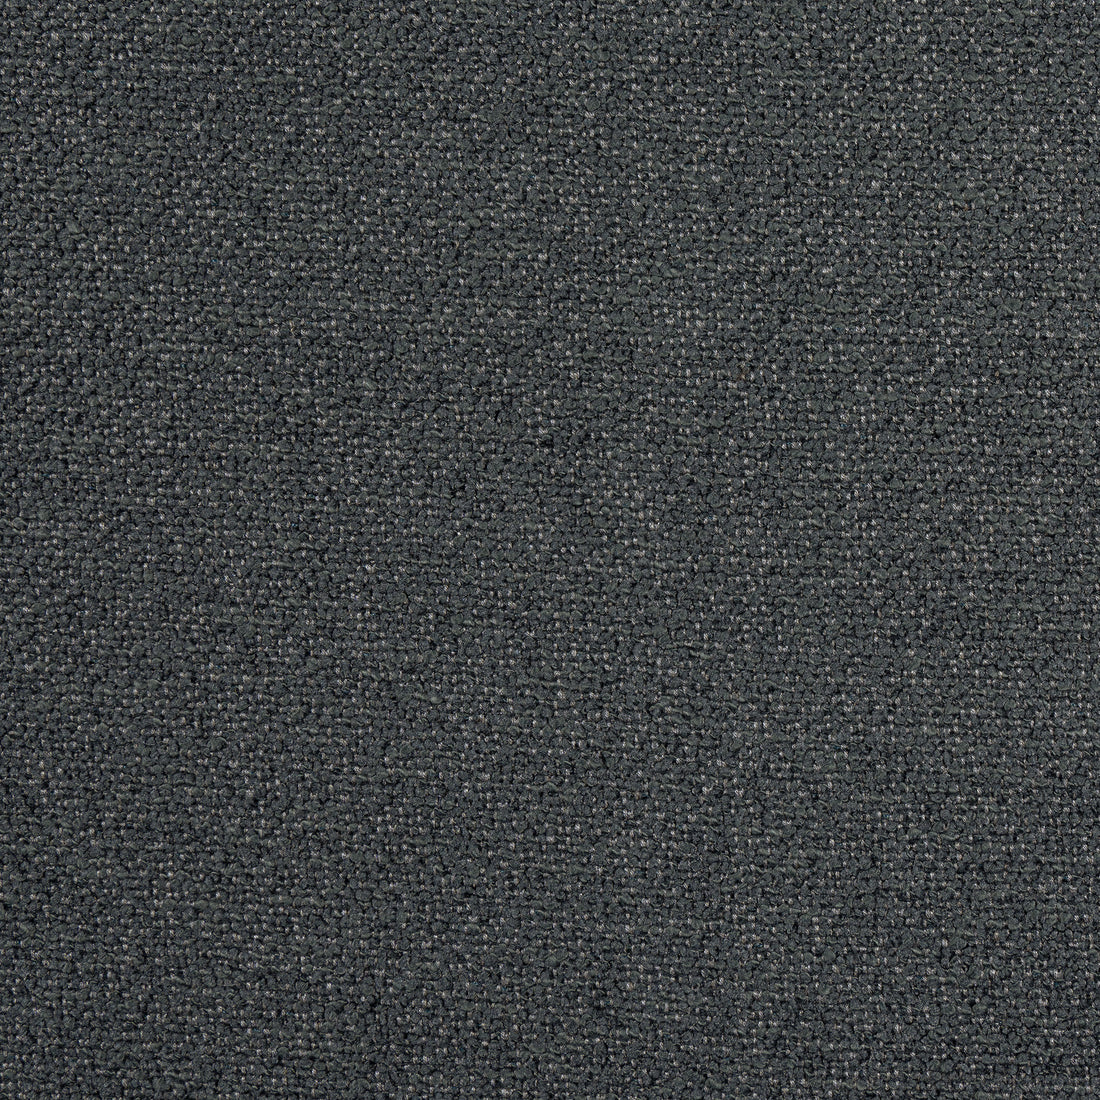 Dolcetto fabric in charcoal color - pattern number W8140 - by Thibaut in the Sereno collection